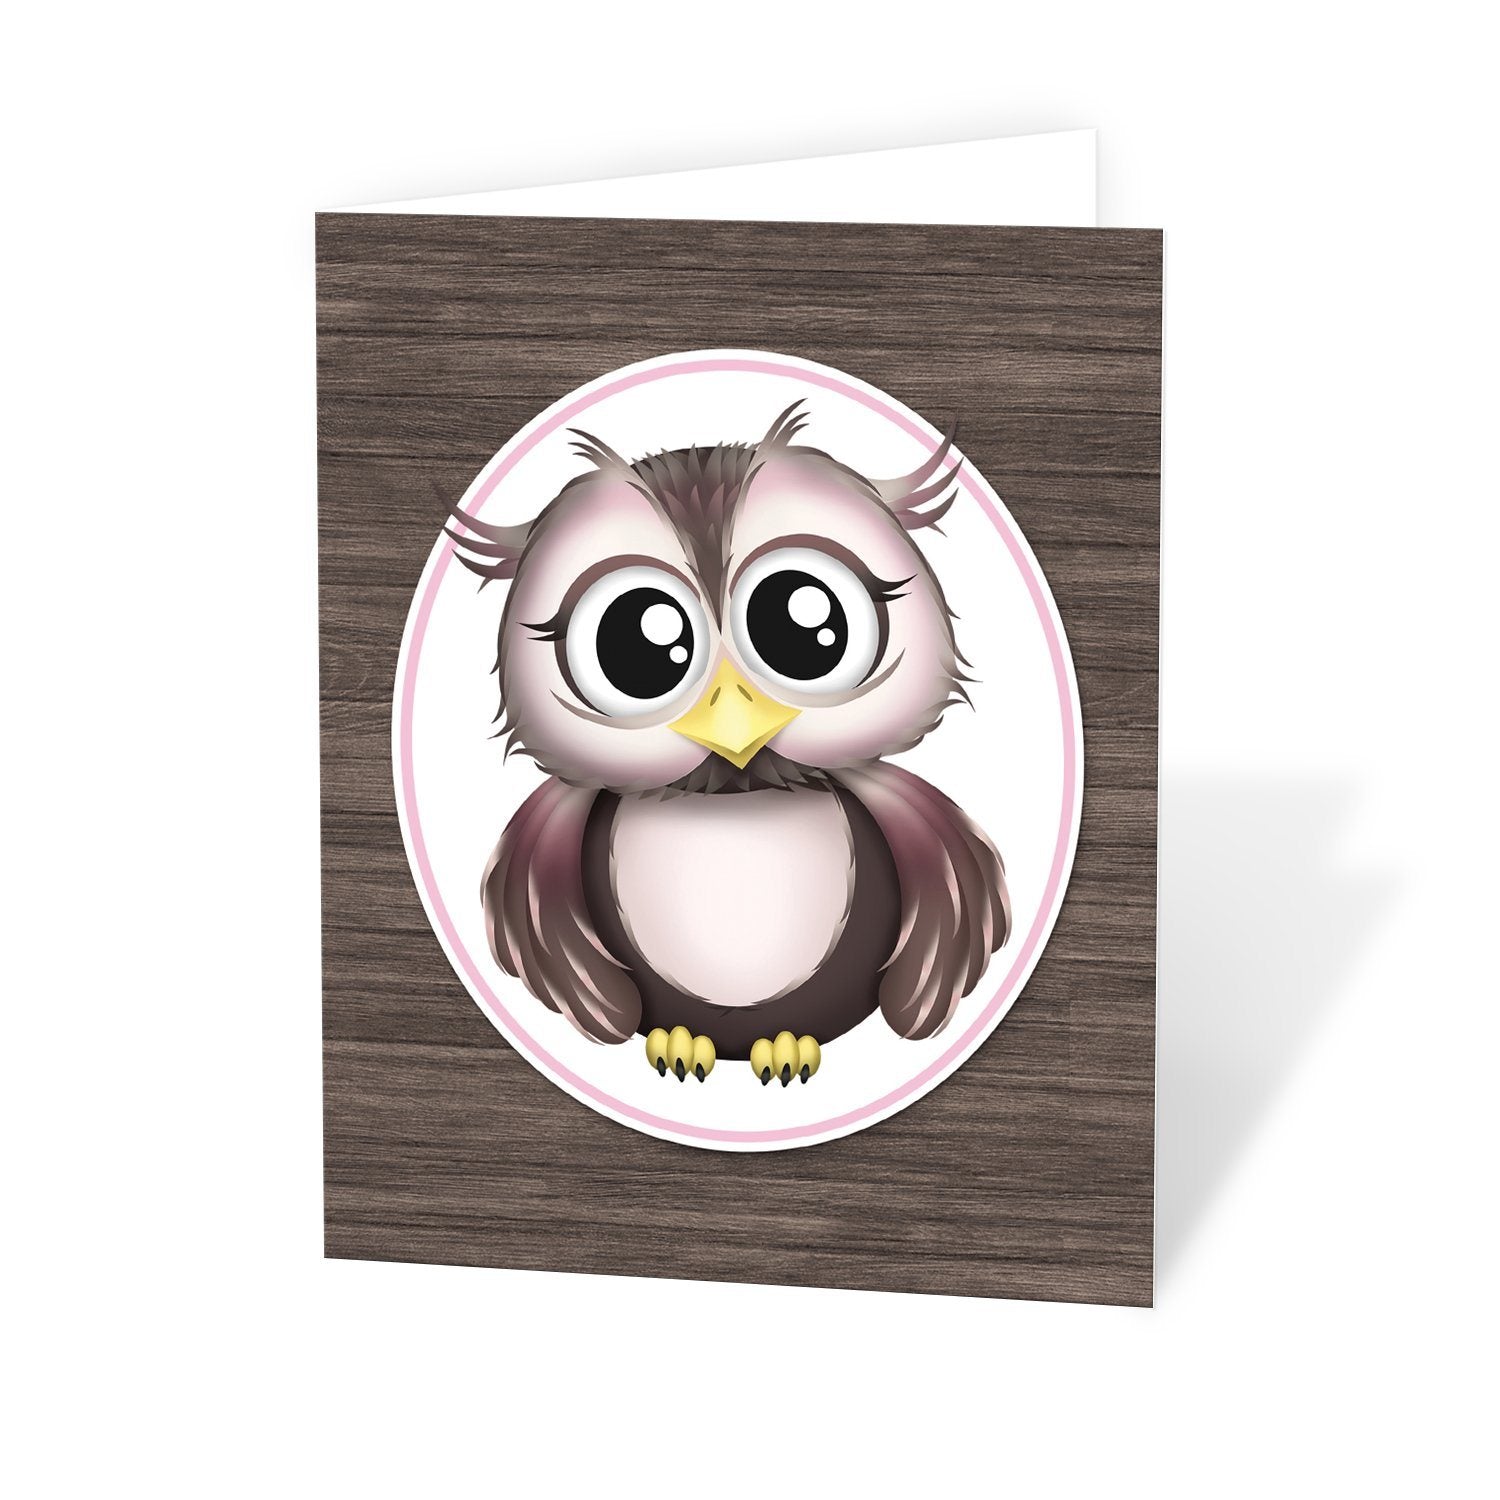 Owl Note Cards - Adorable Owl Pink and Brown Note Cards at Artistically Invited